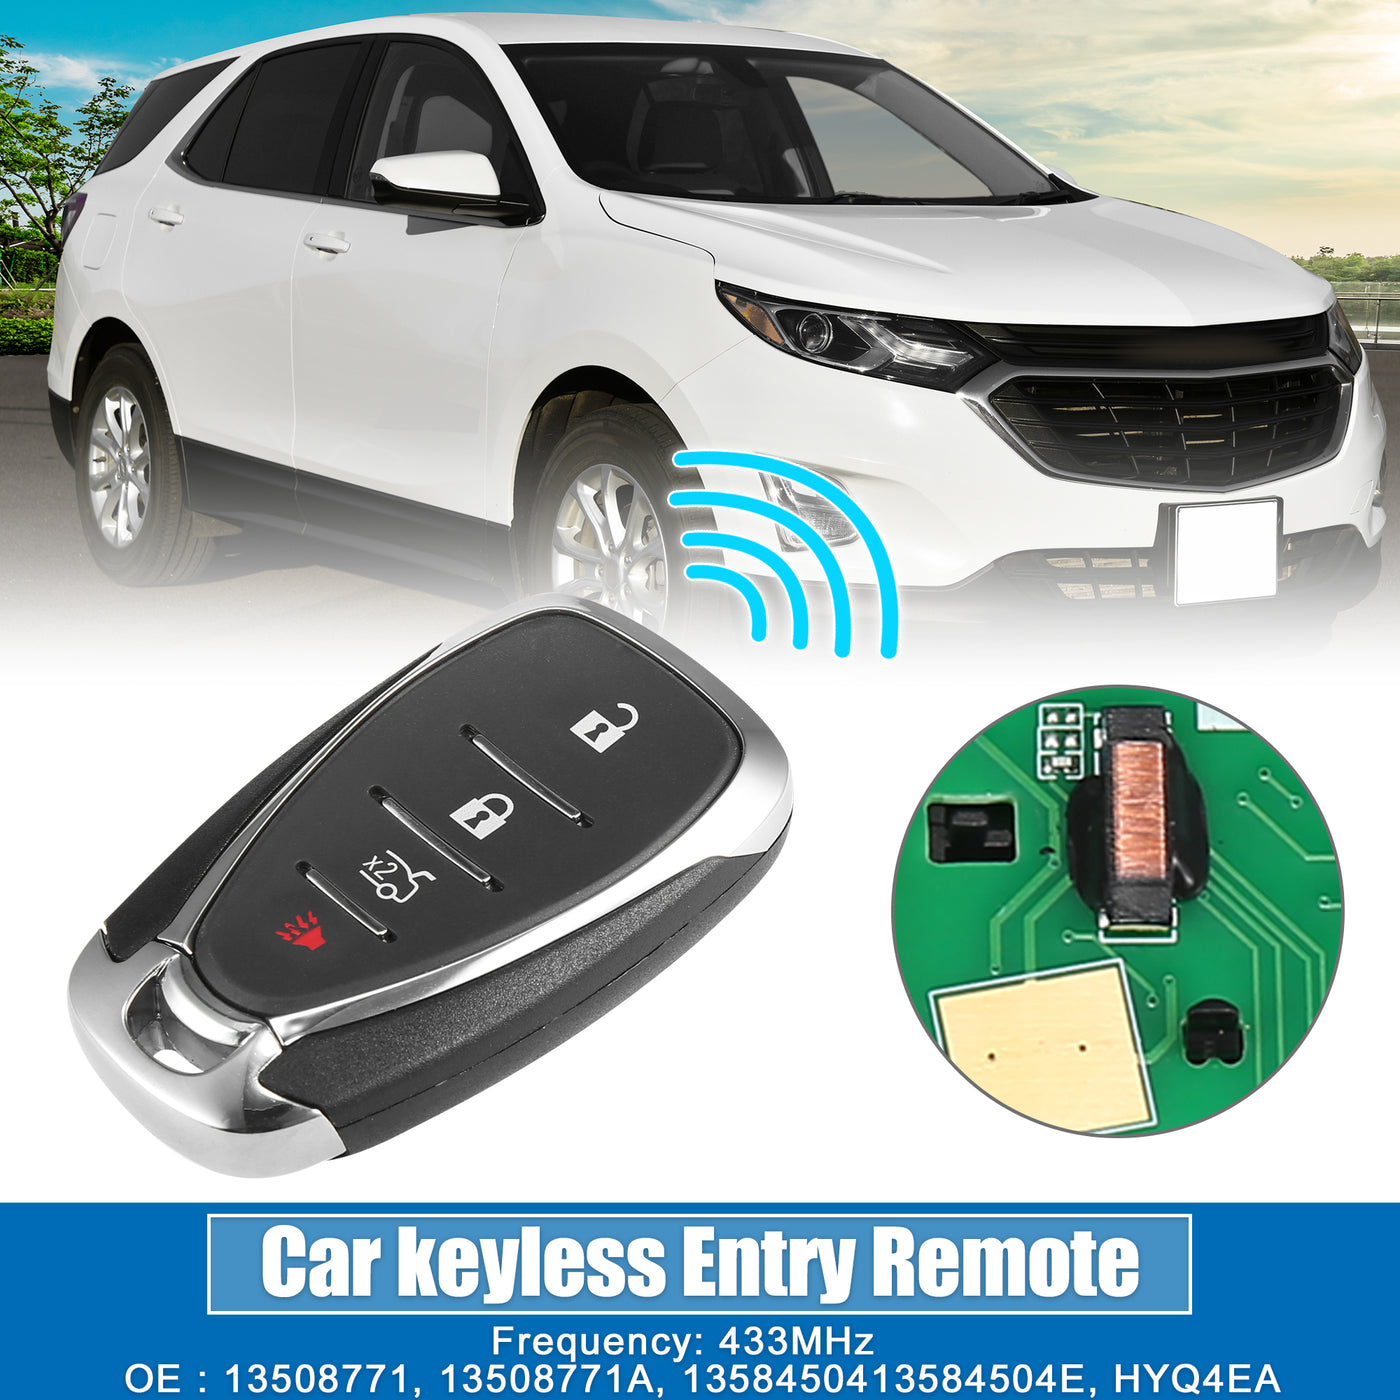 X AUTOHAUX Car 4 Button Car Keyless Entry Remote Control Replacement Key Fob Proximity Smart Fob HYQ4EA for Chevy Malibu 2016-2021 433MHz 46 Chip